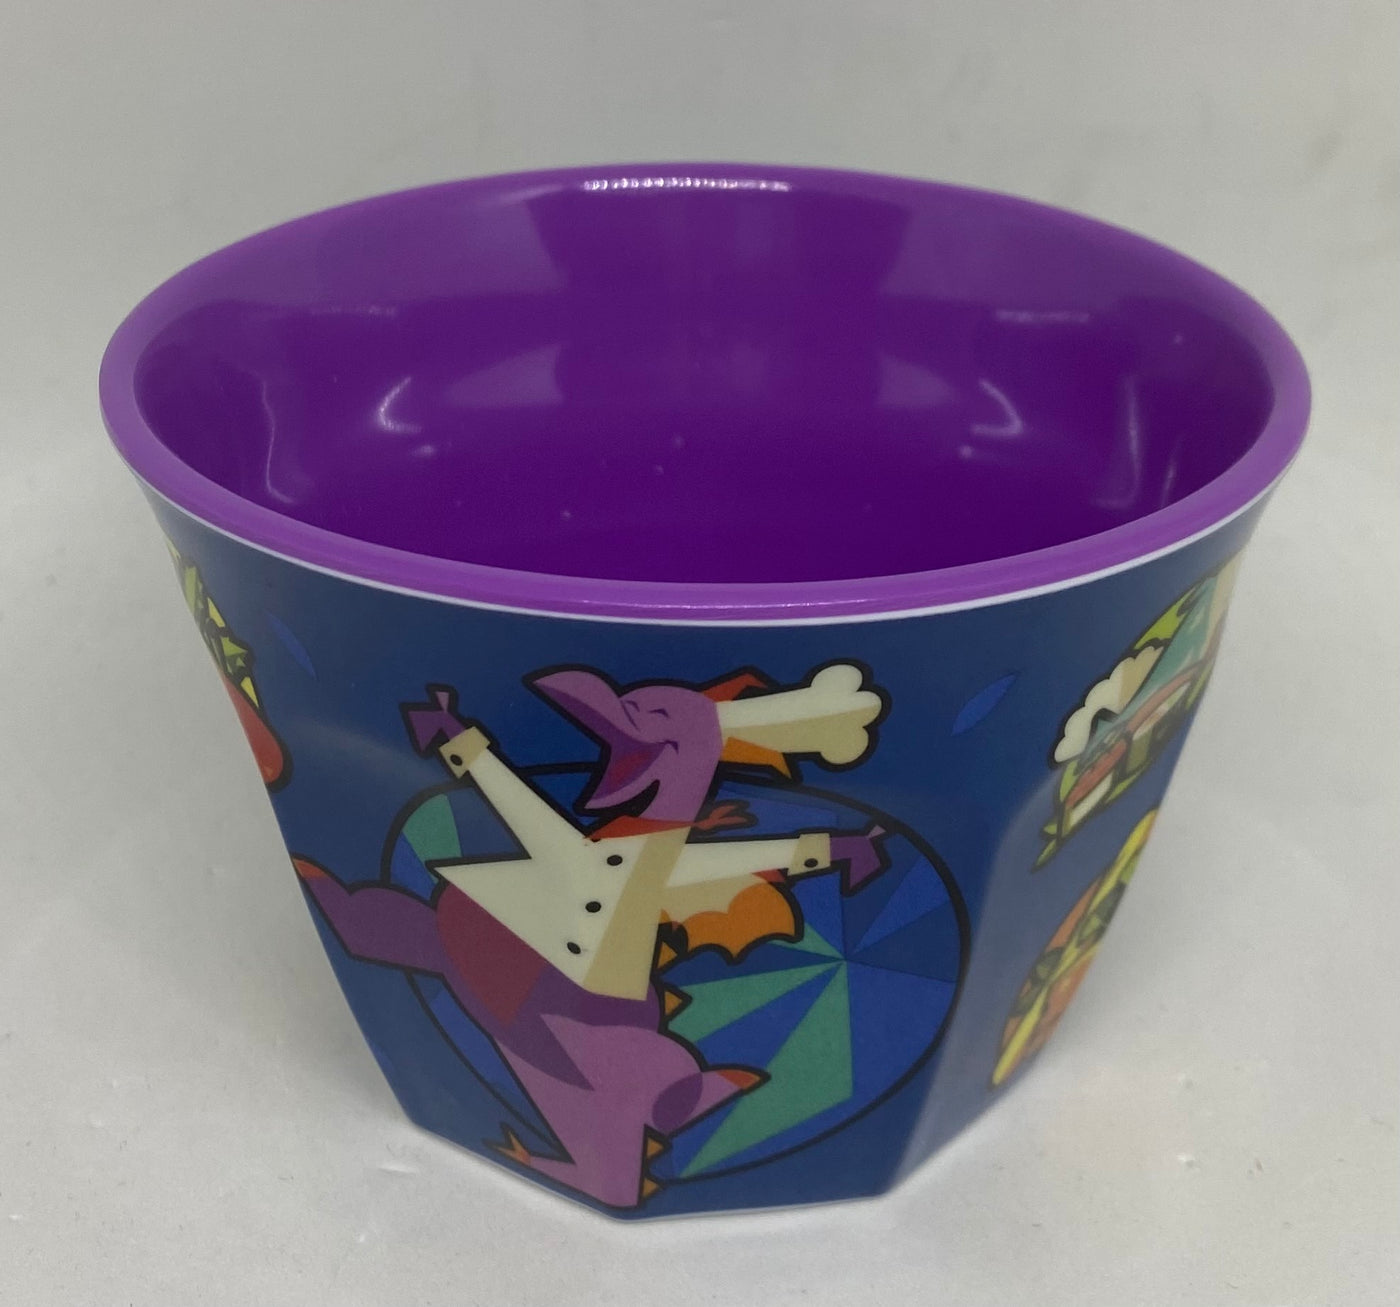 Disney Epcot Food And Wine Festival 2021 Figment Prize Bowl New